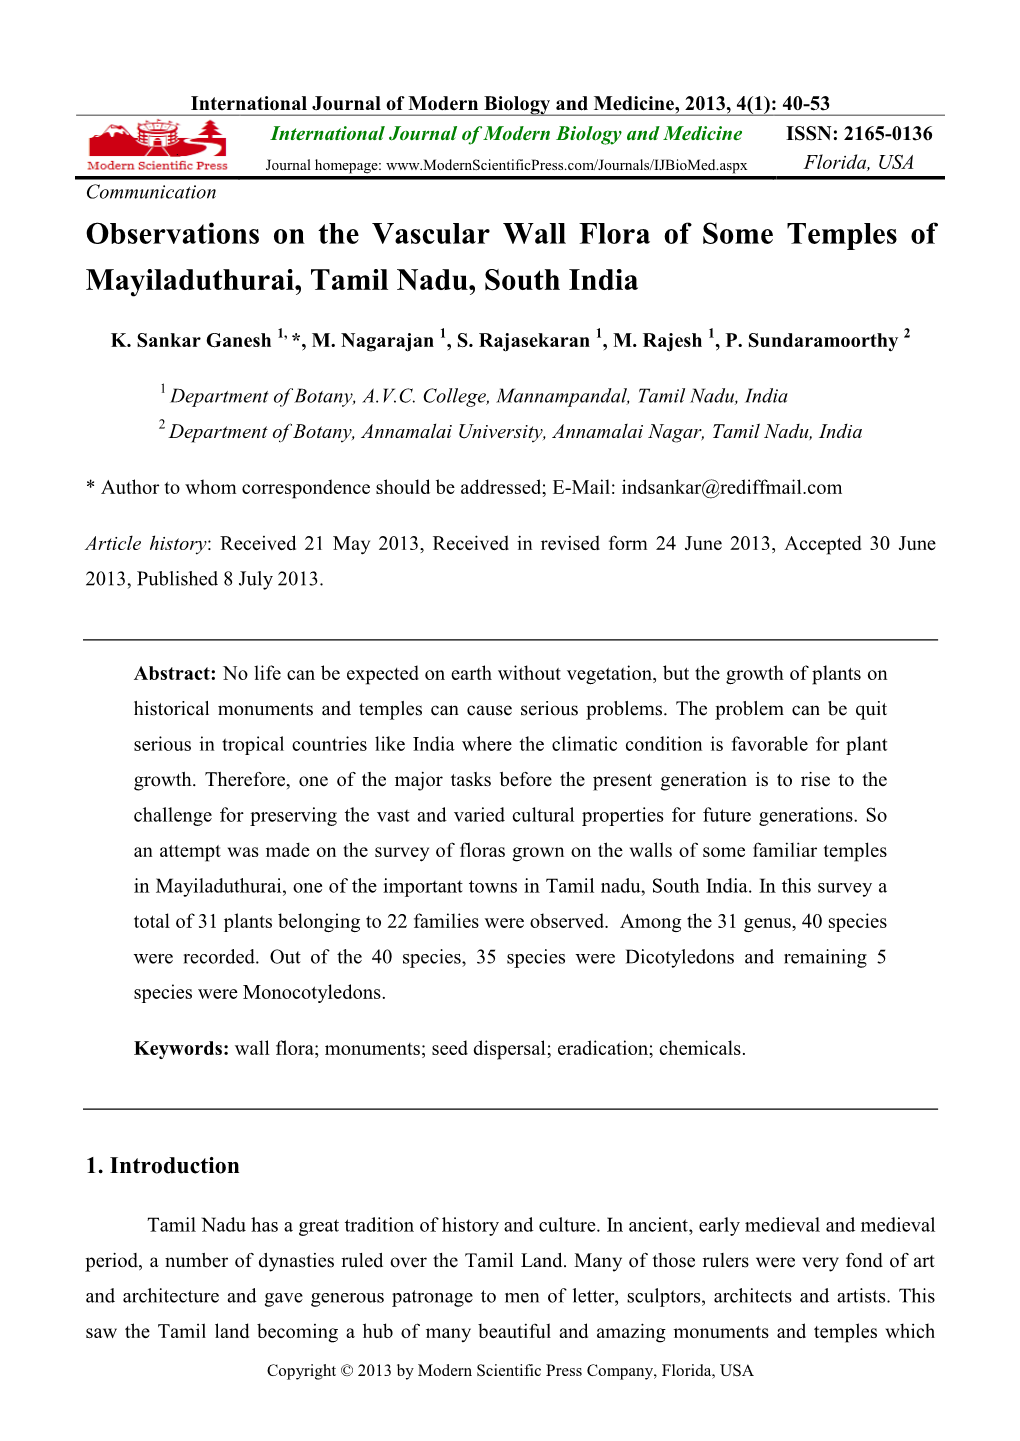 Observations on the Vascular Wall Flora of Some Temples of Mayiladuthurai, Tamil Nadu, South India